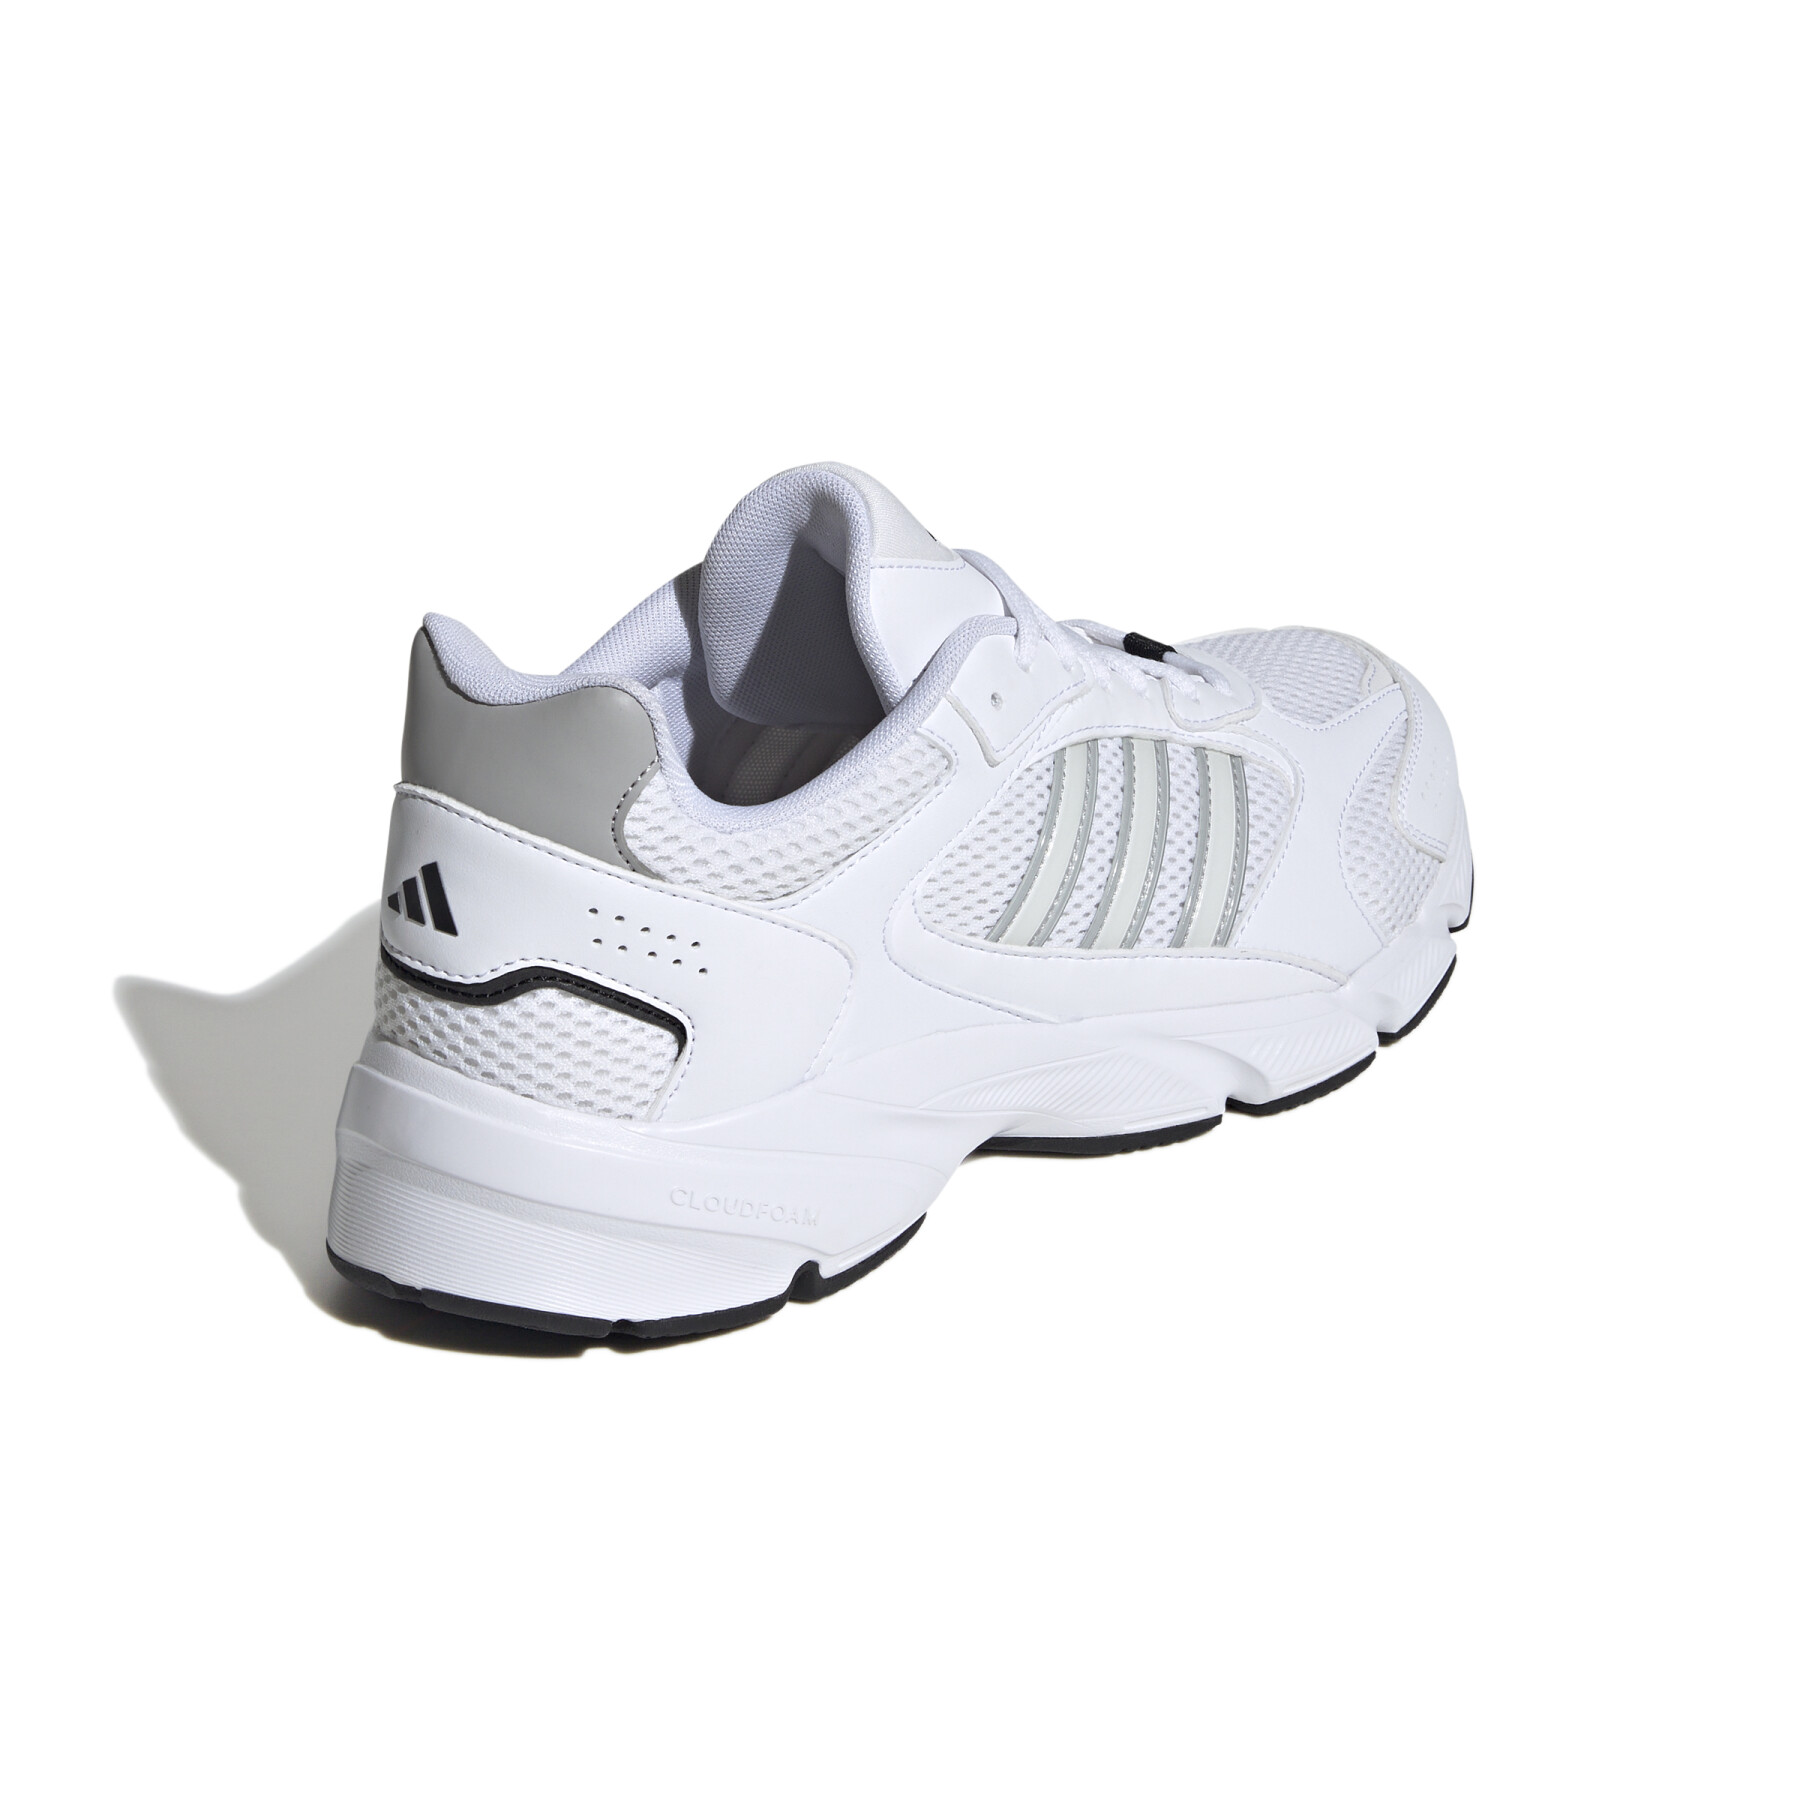 Sneakers adidas Crazychaos 2000